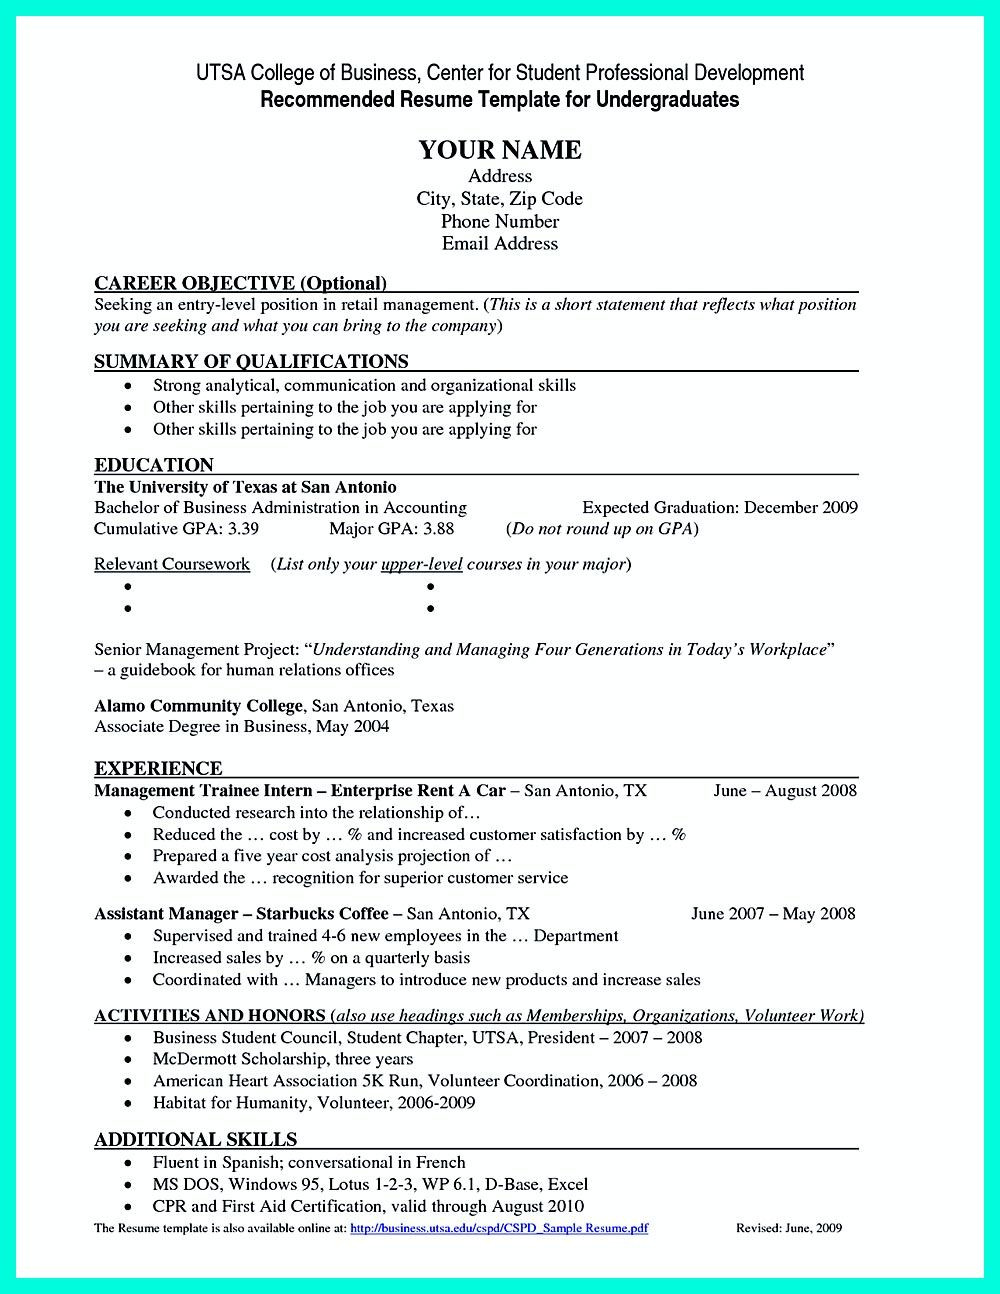 Sample Resume with associates Degree Listed Best Current College Student Resume with No Experience Job …